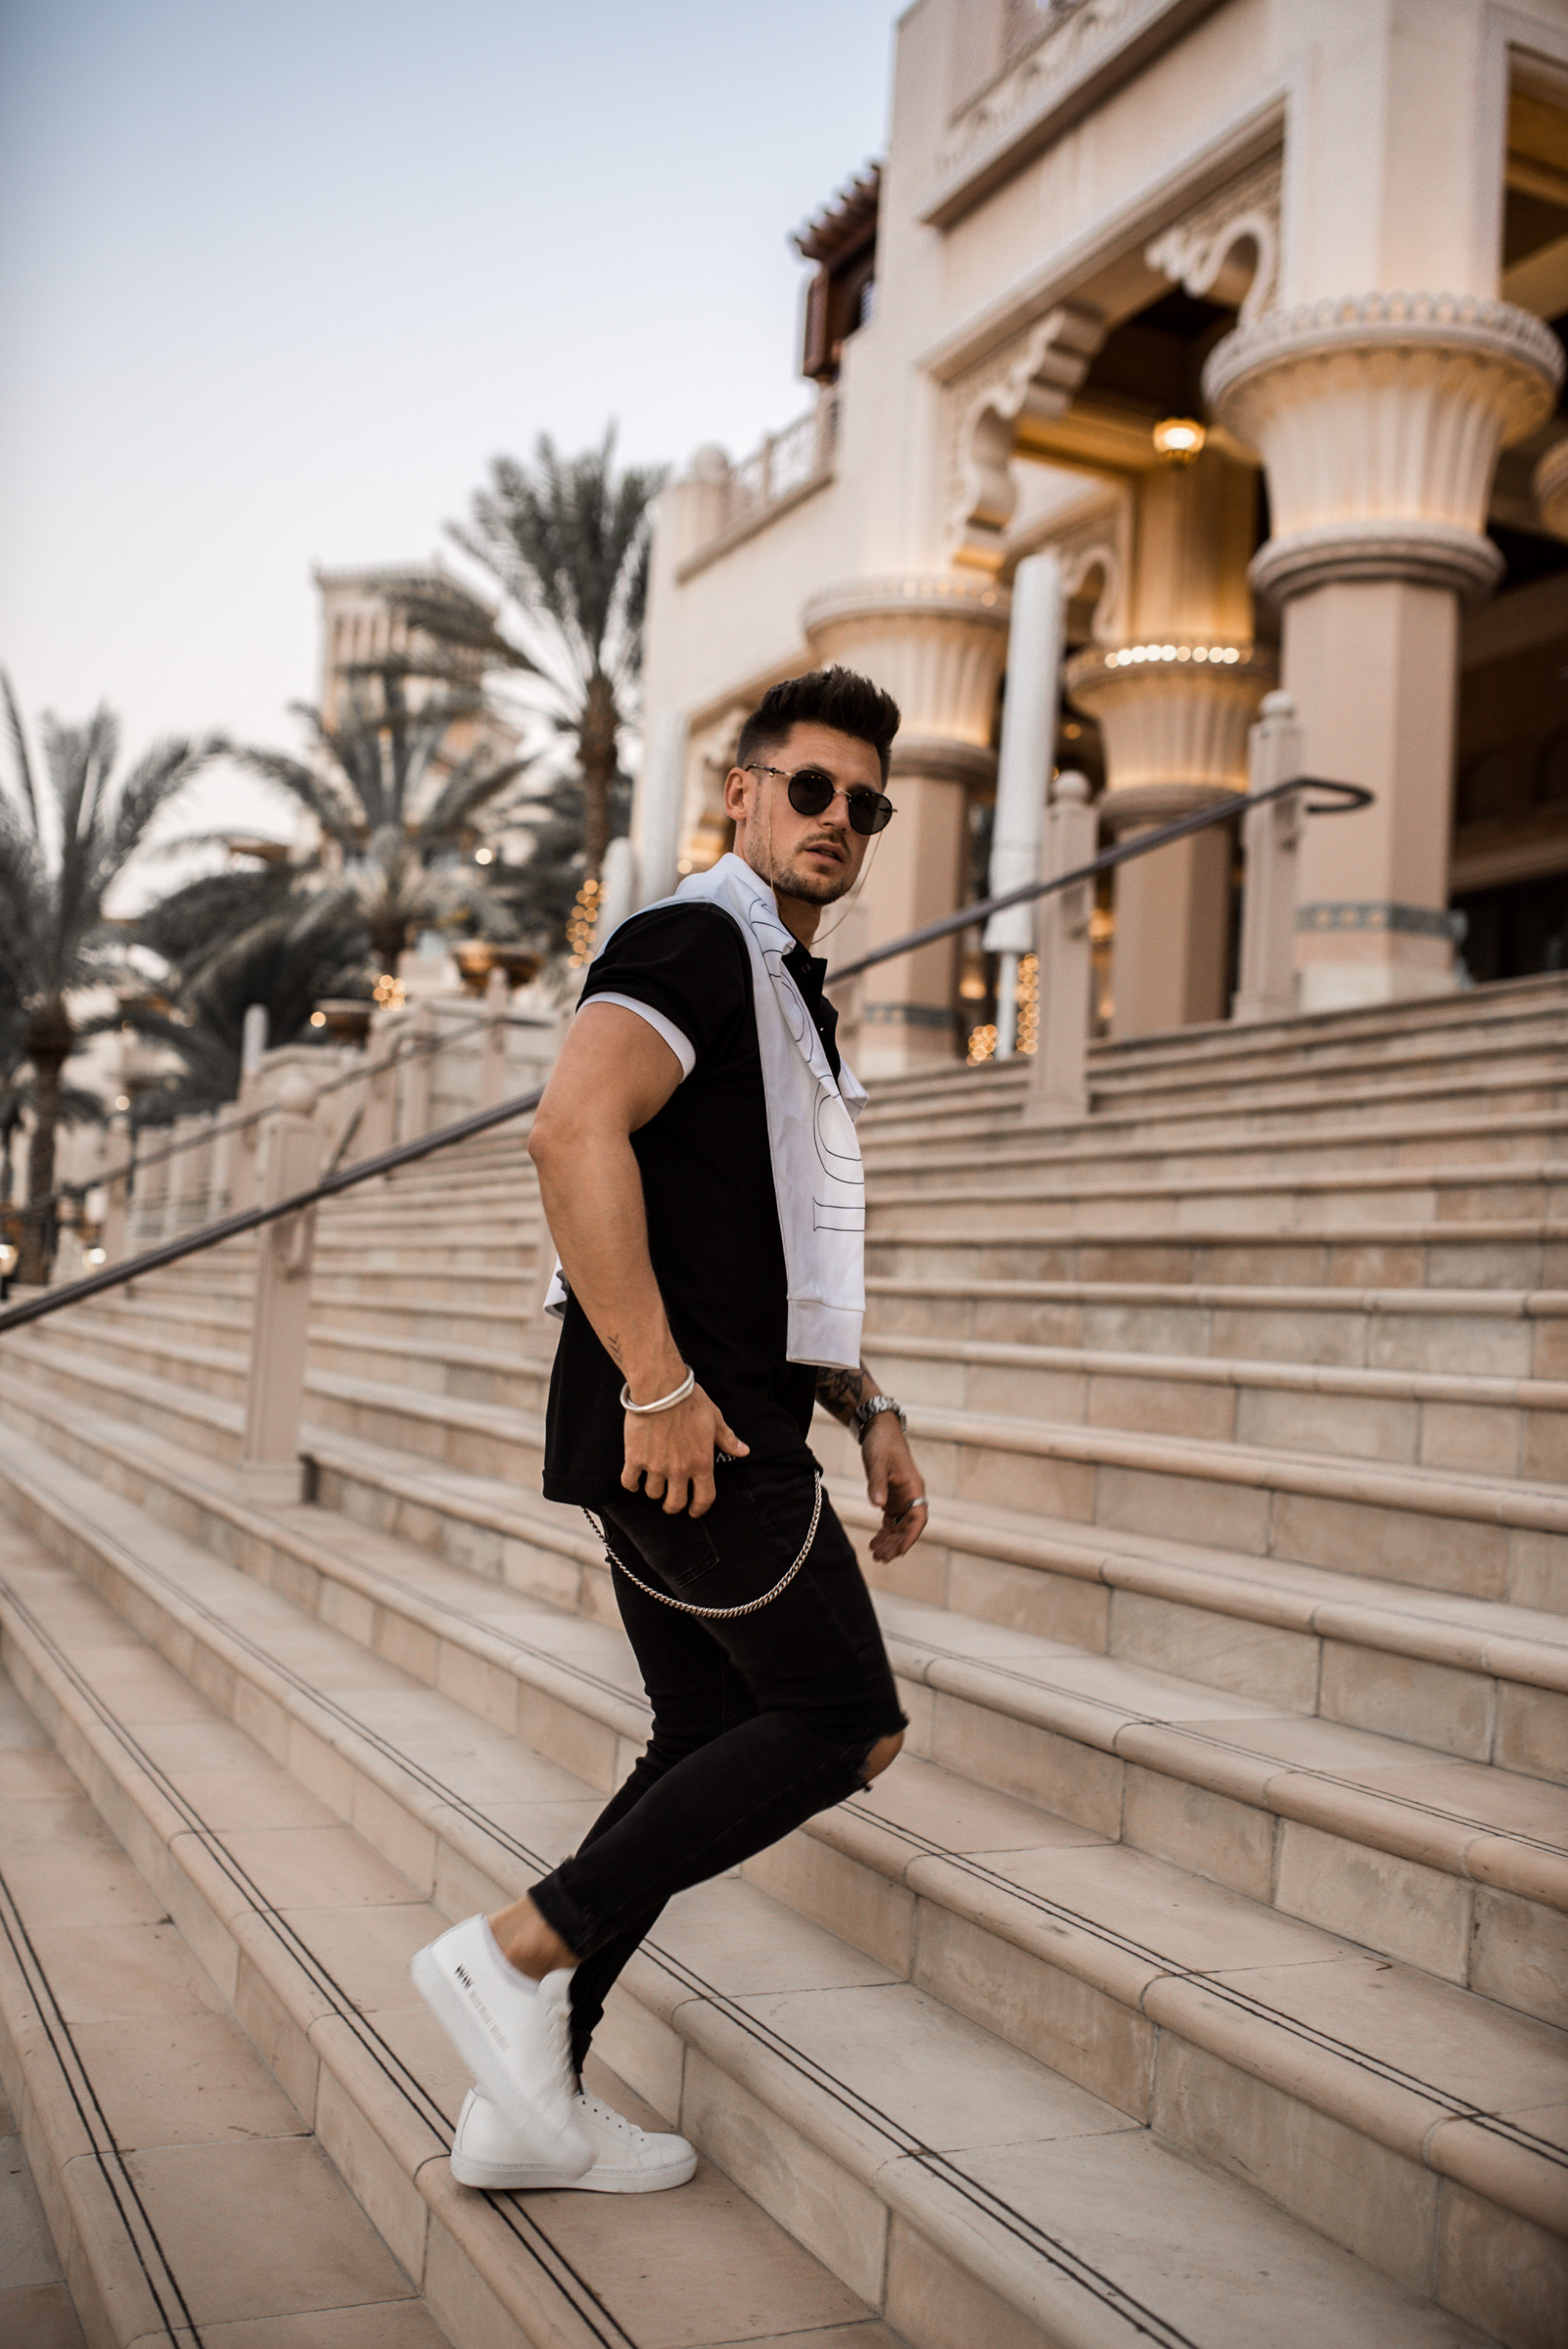 Tommeezjerry-Lifestyleblog-Fashionblog-Maennermodeblog-Maennerblog-Modeblog-Dubai-Lacoste-Polo-Shirt-Outfit-Sommer-Look-Springtime